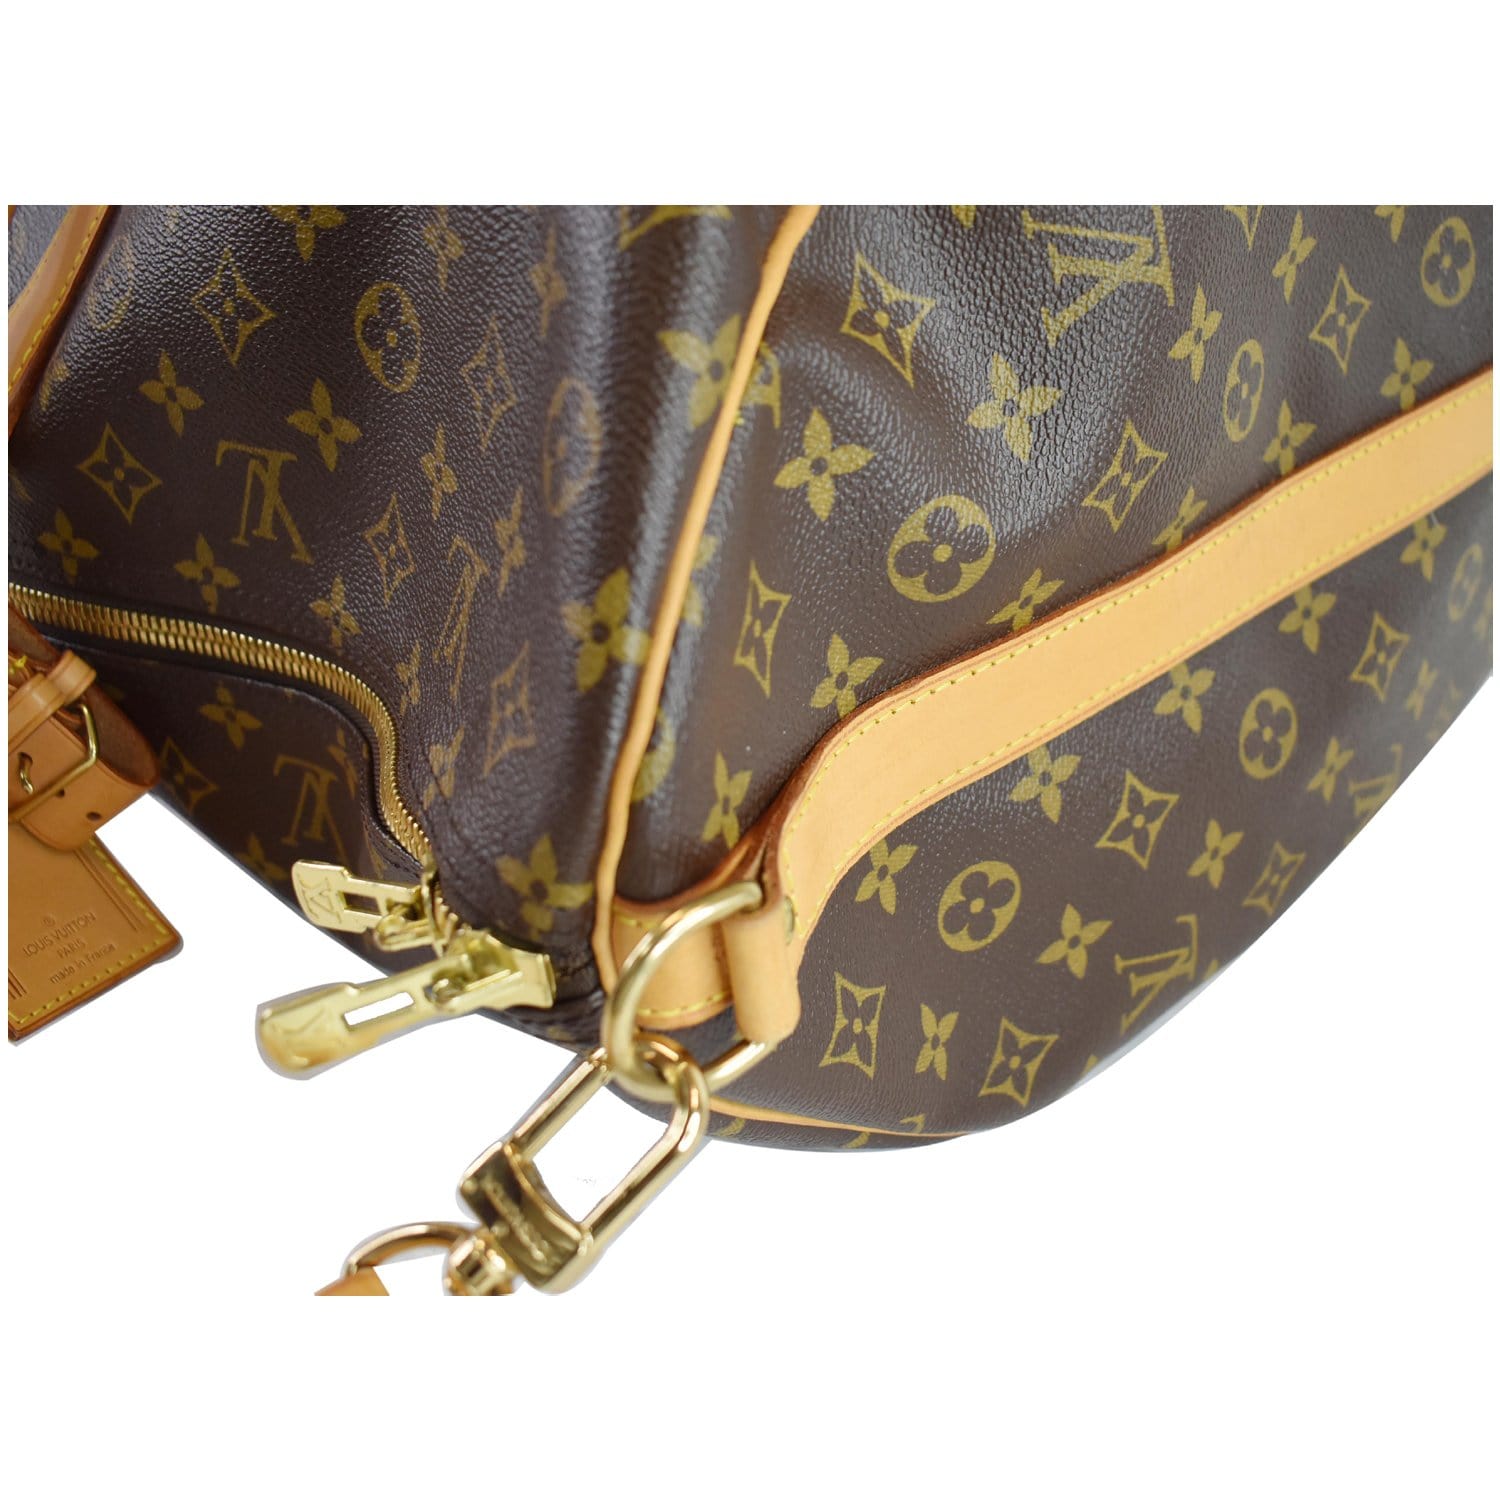 What Is The Largest Louis Vuitton Duffle Bag Made